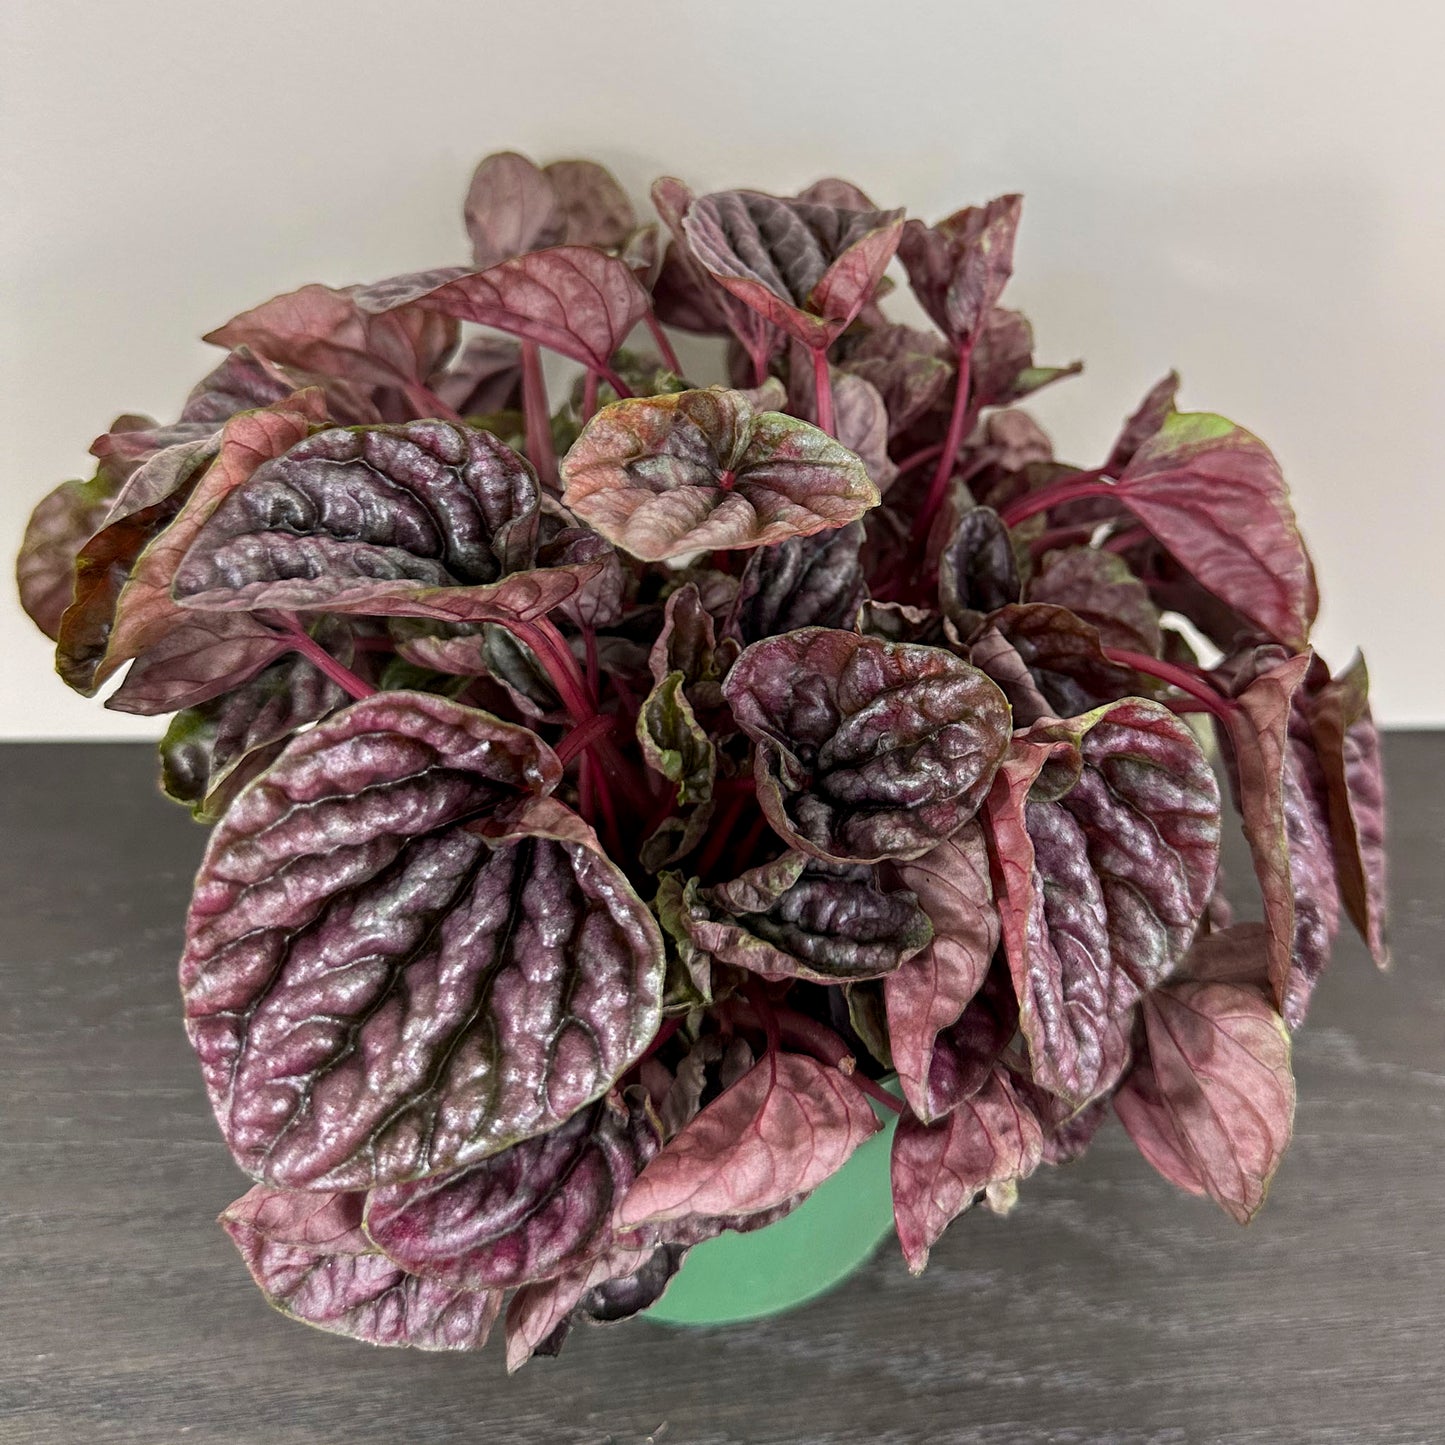 Peperomia 'Red Ripple' - A striking indoor plant with vibrant red-veined leaves.